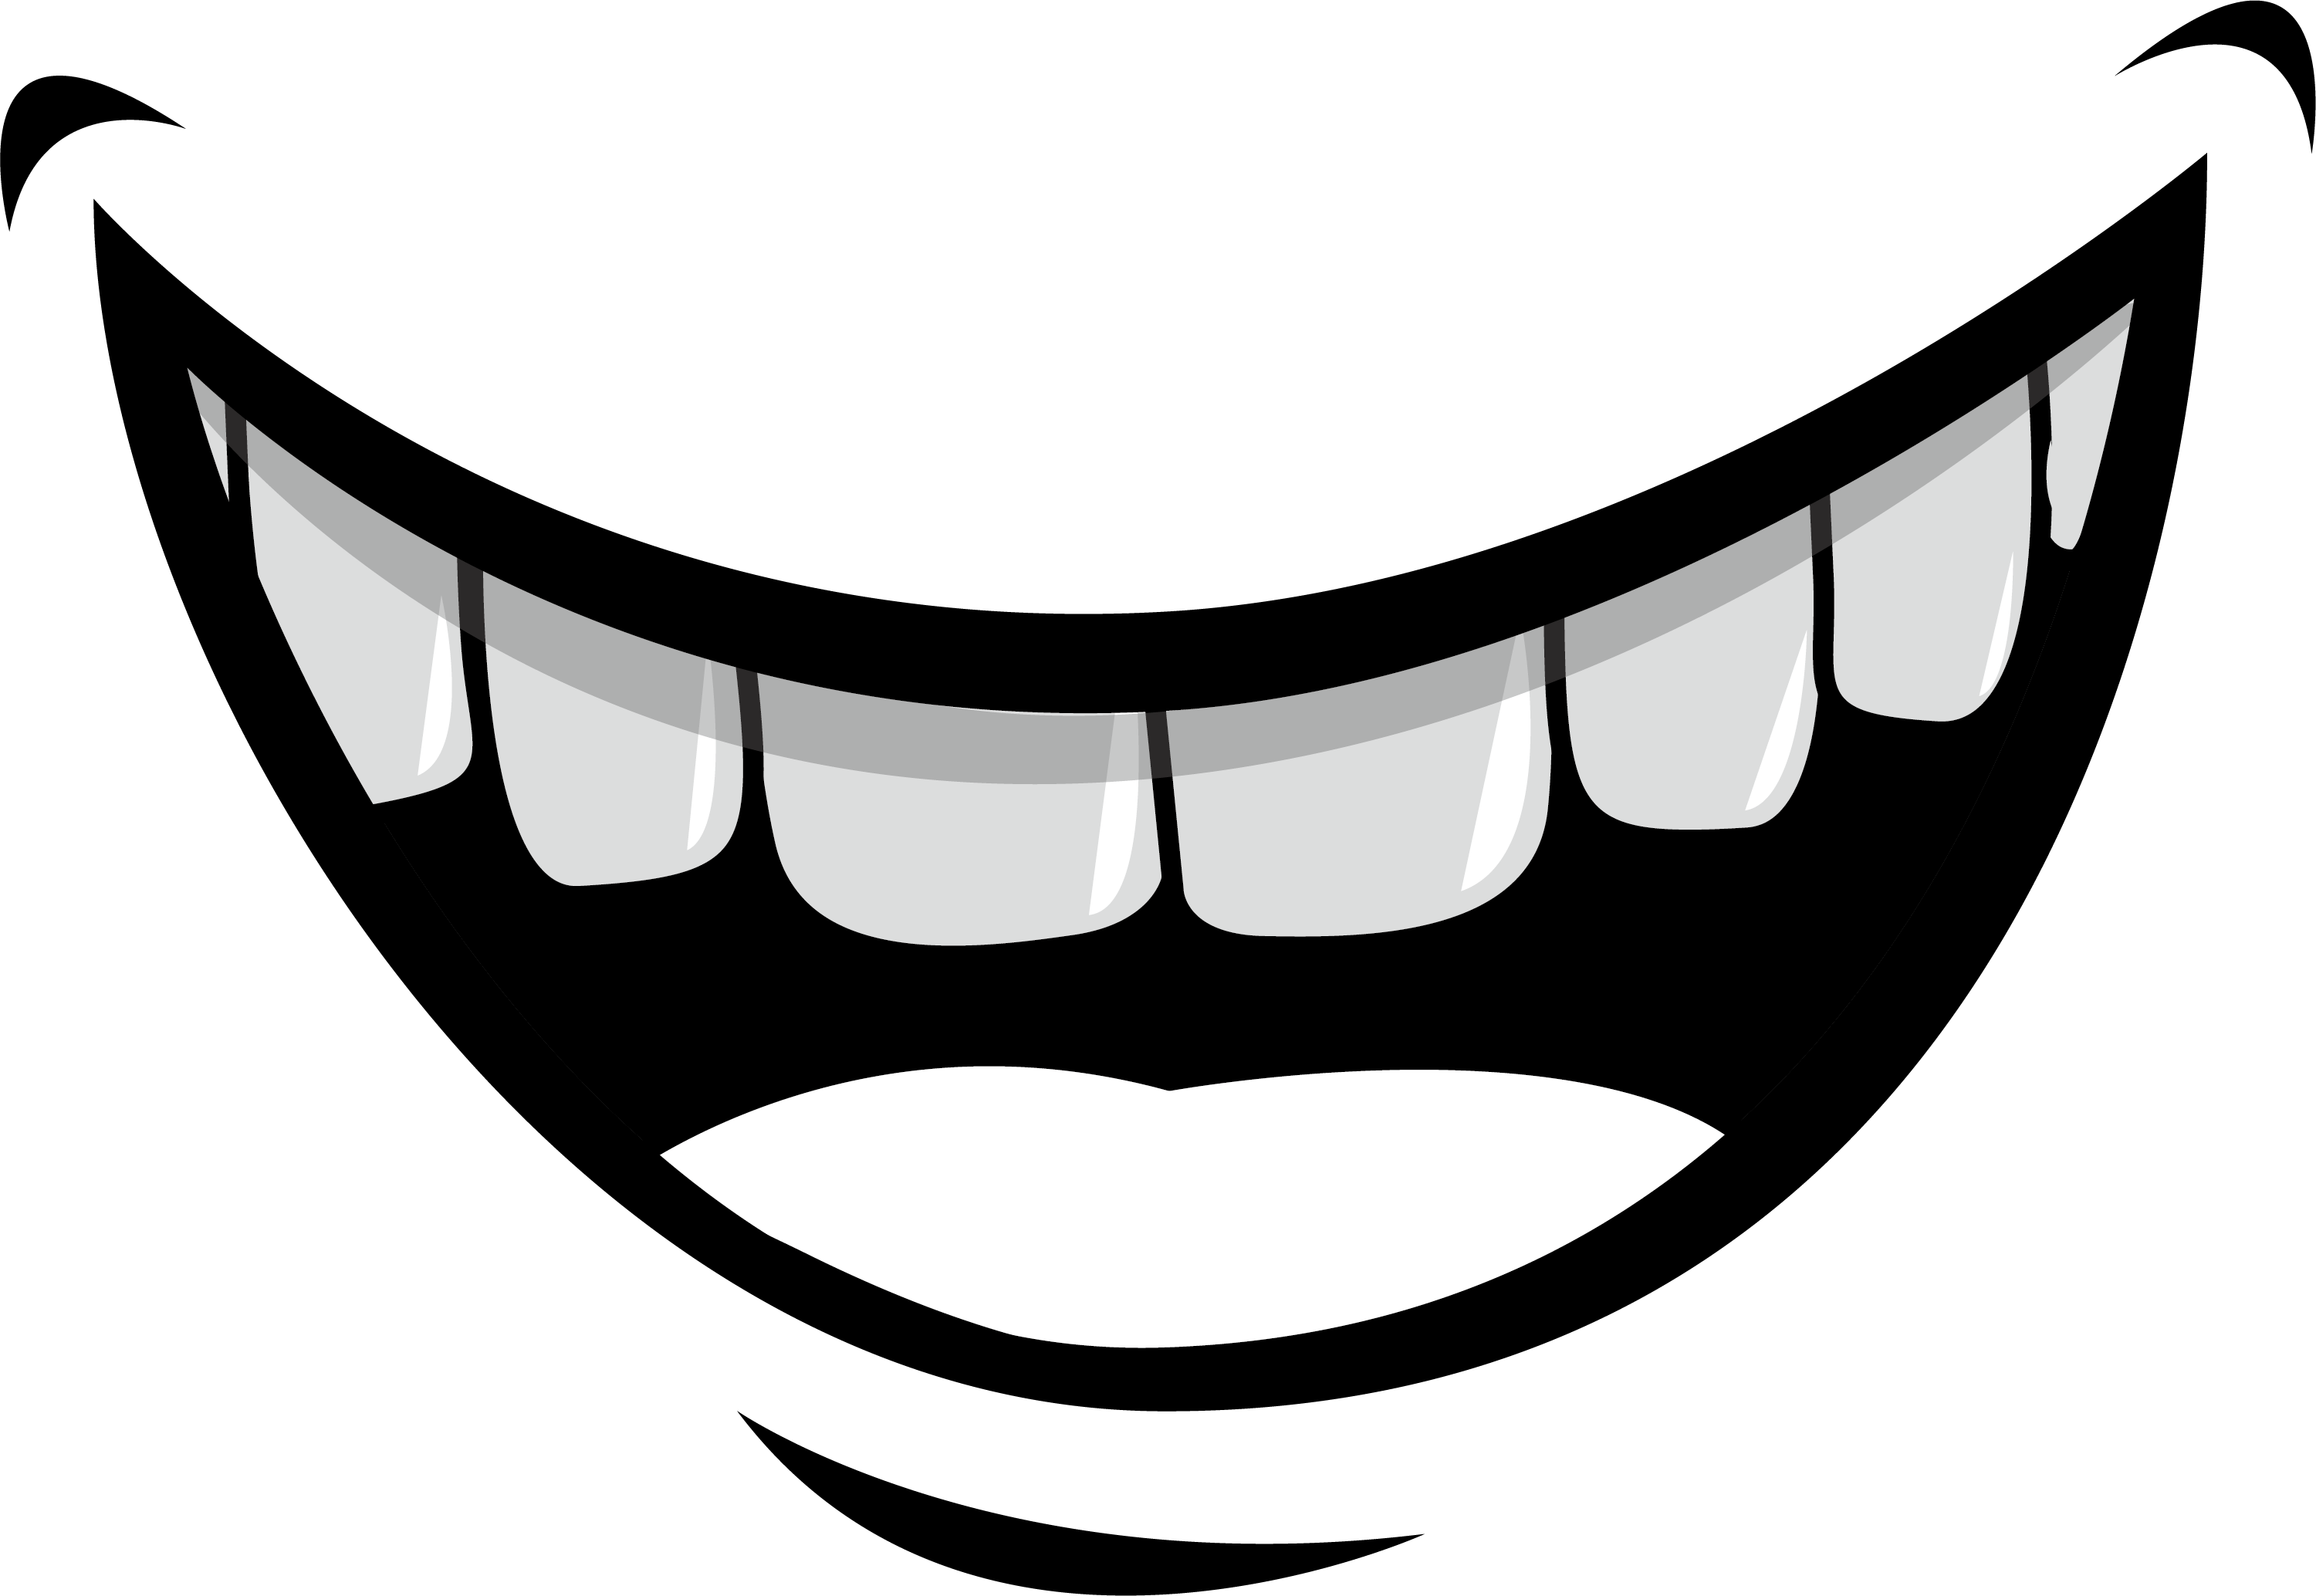 Anime Mouths Background PNG Image